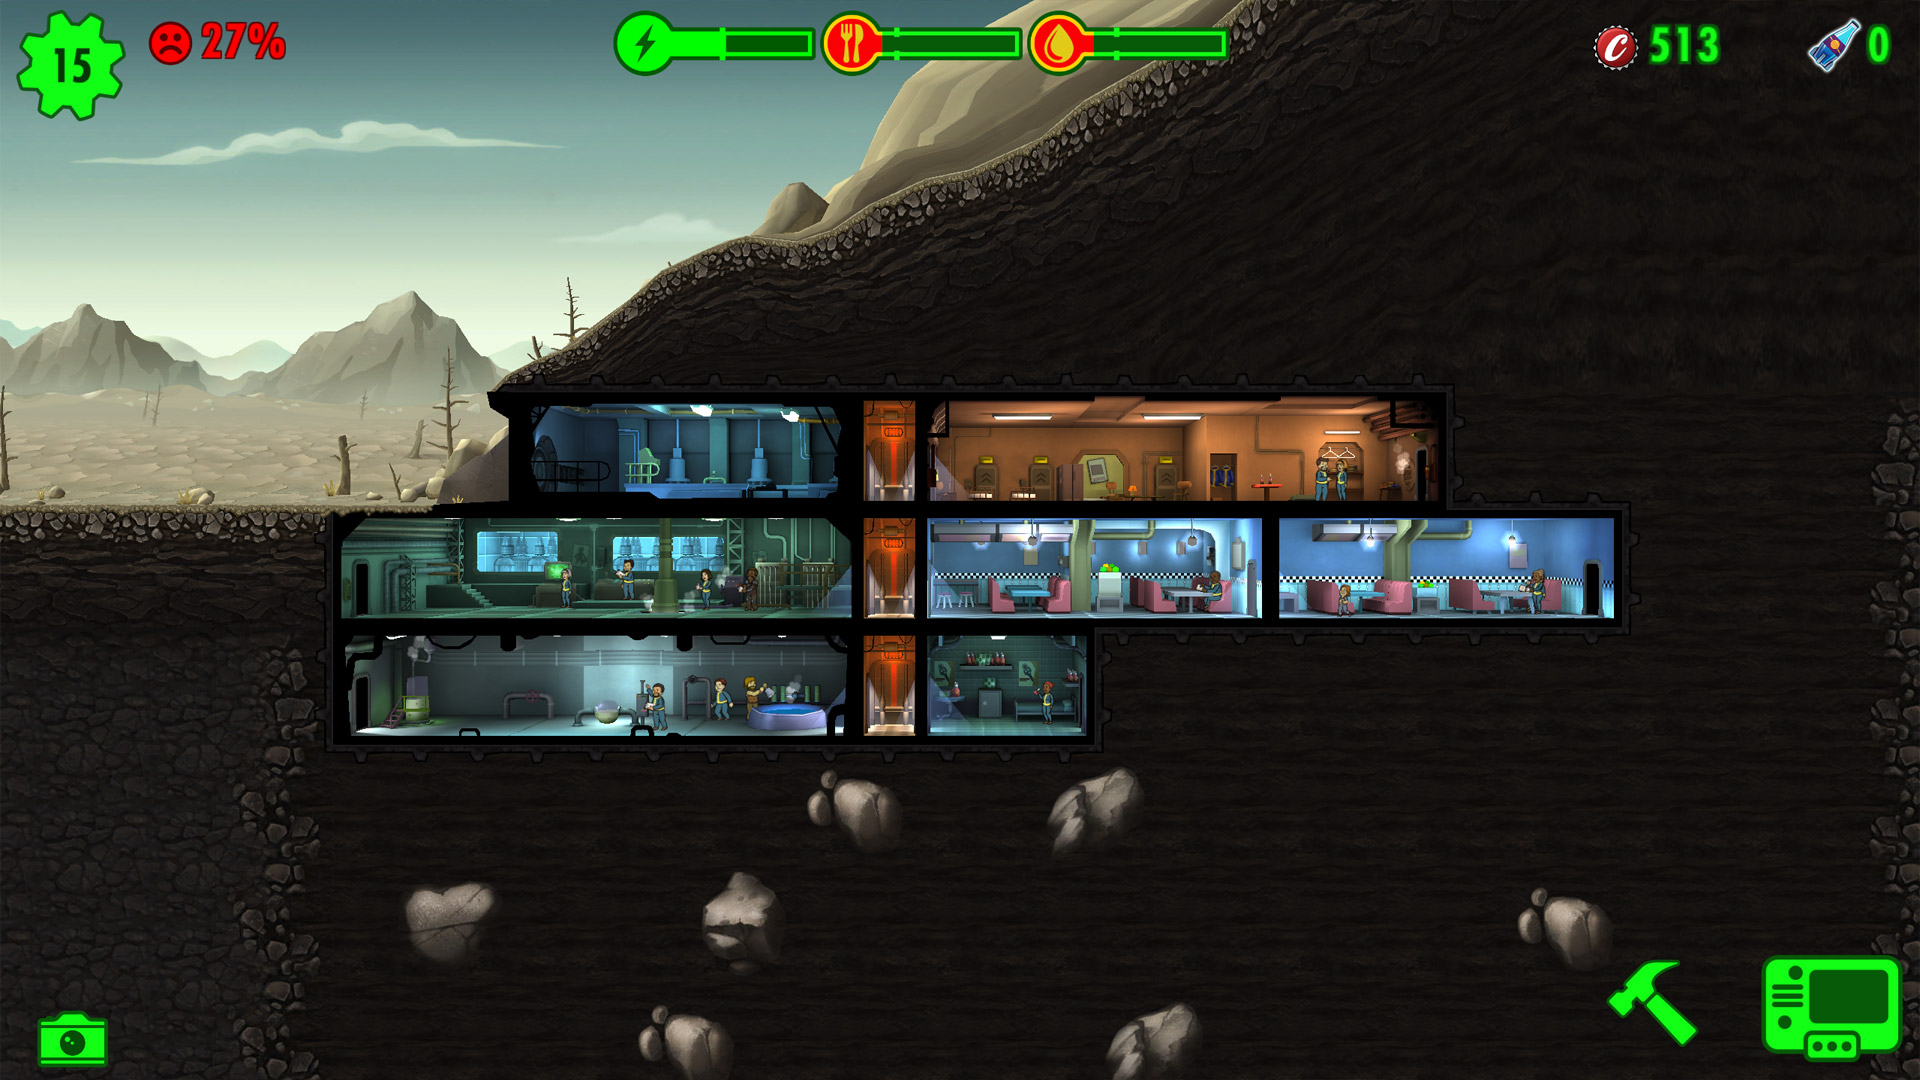 fallout shelter pc how to advance quickly